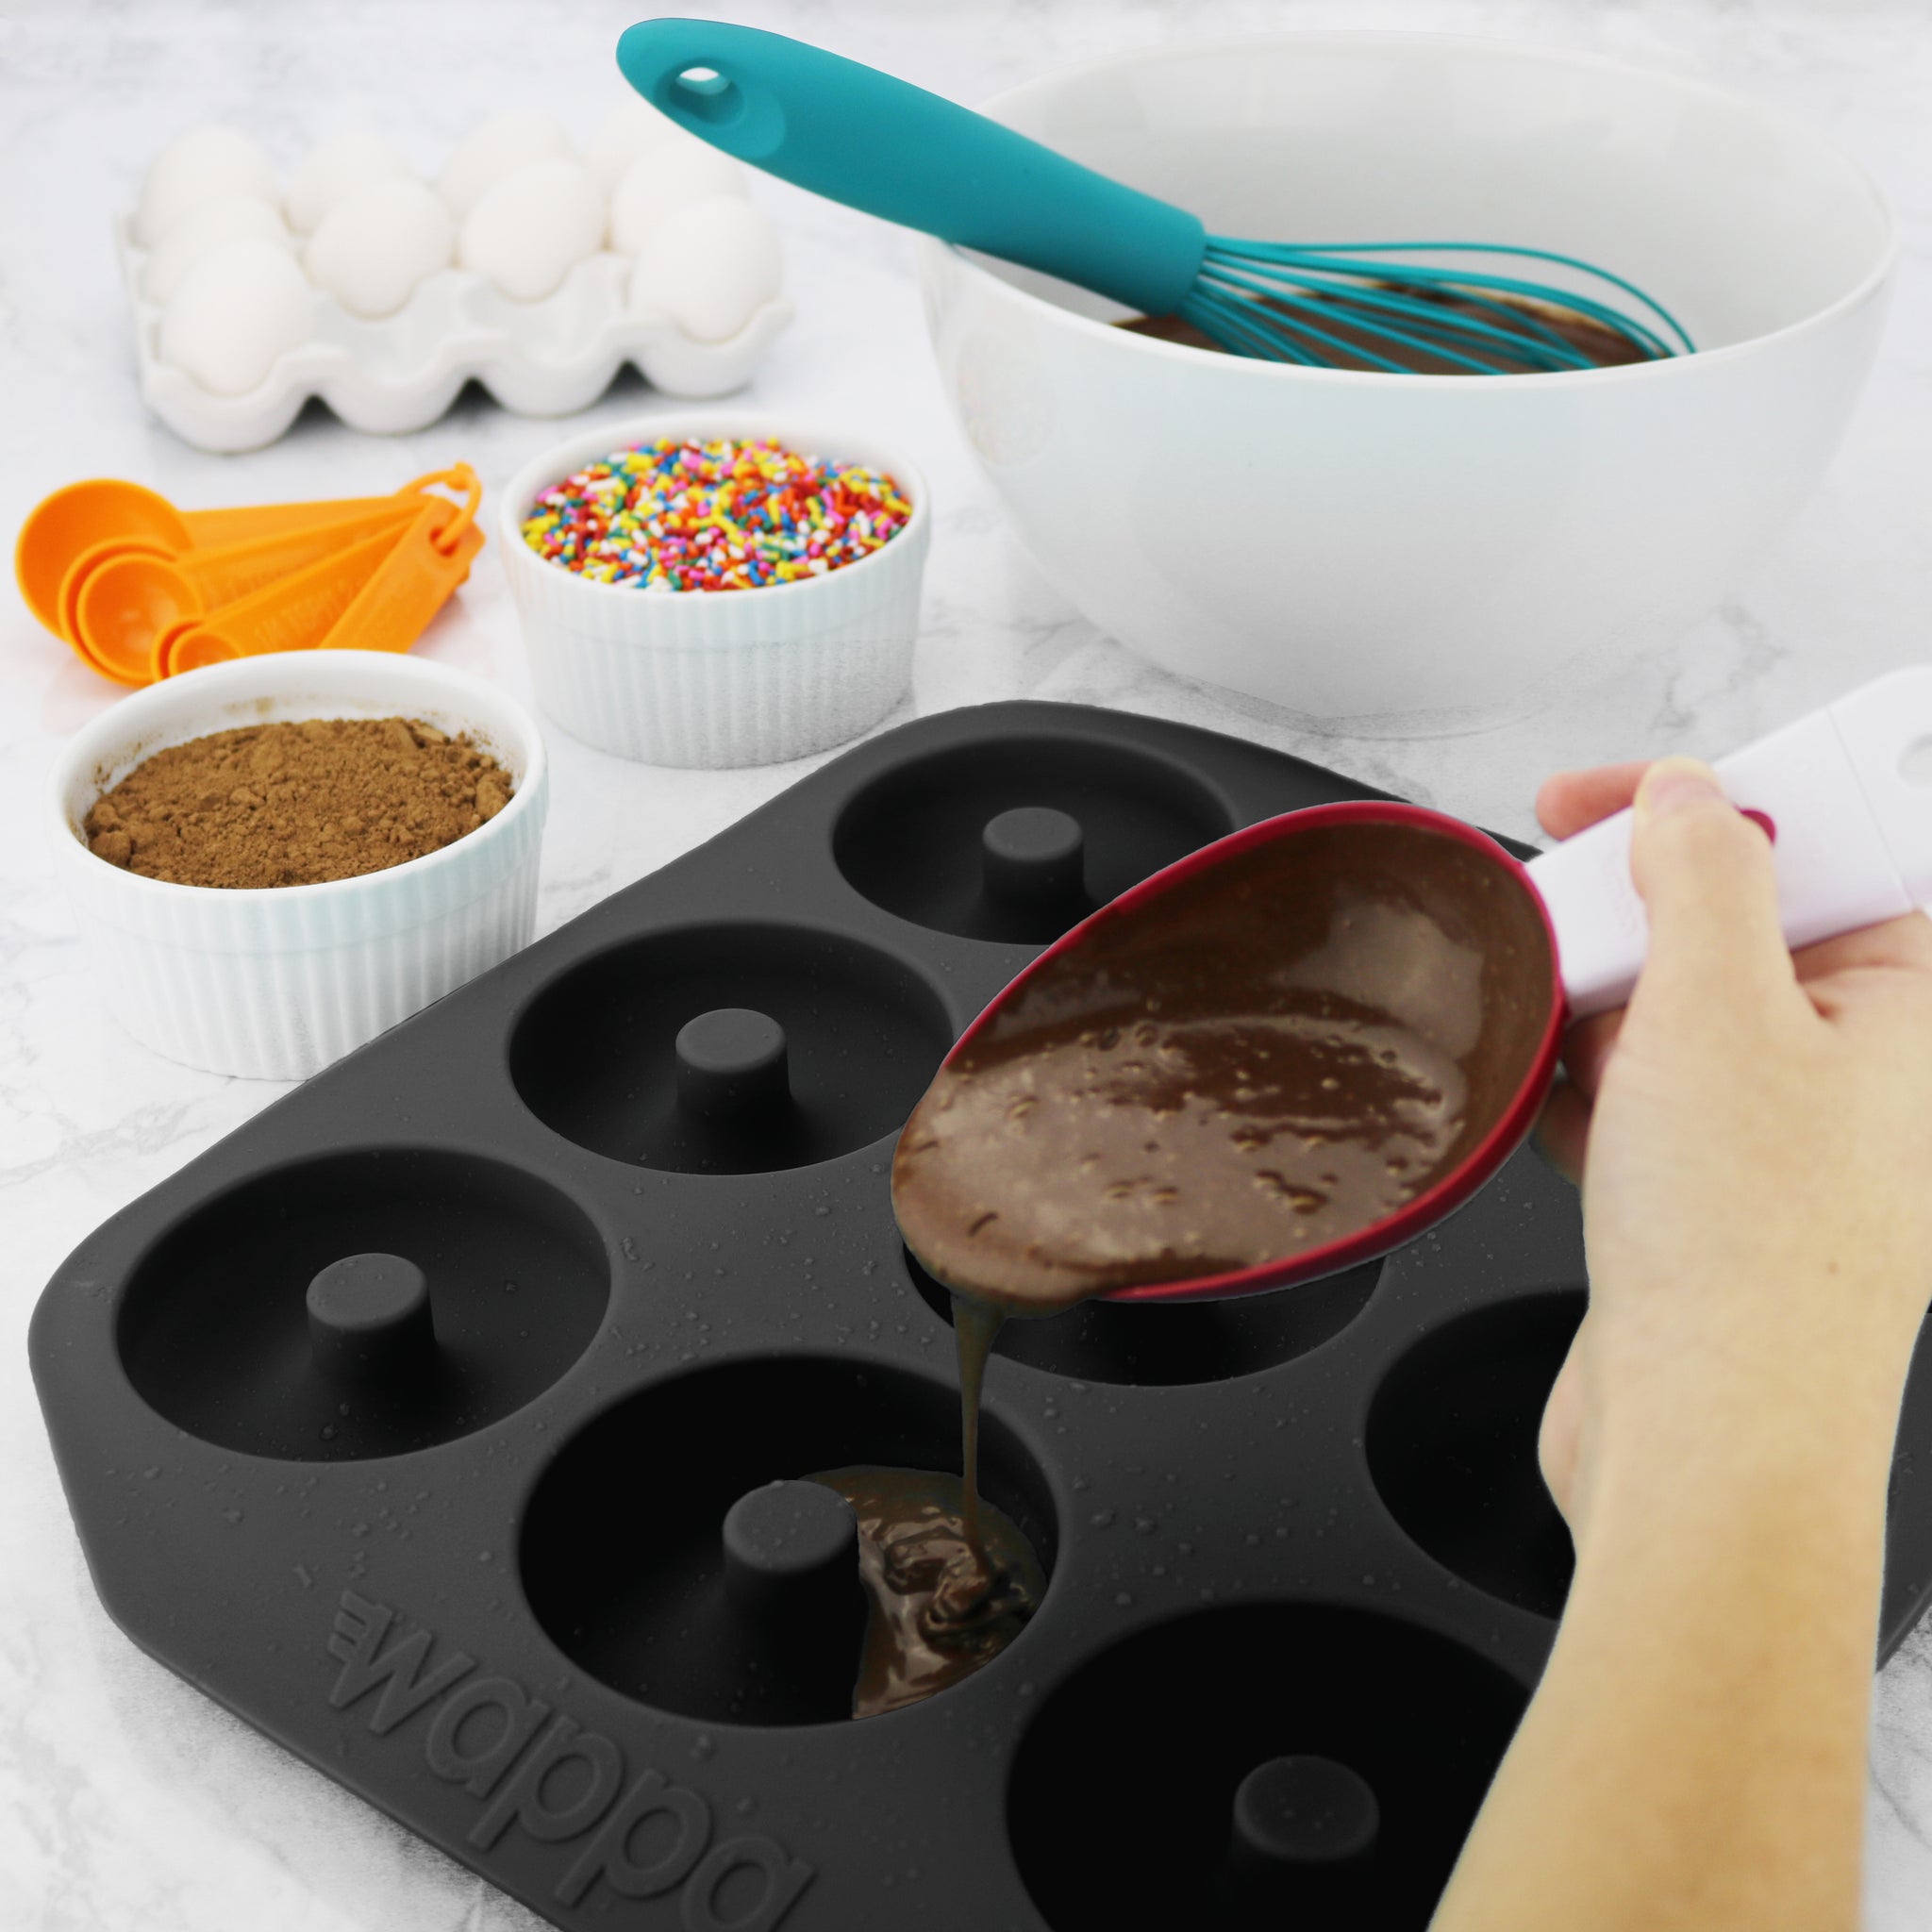 Walfos Full Size Silicone Donut Mold - 4 Inch Big Size Silicone Doughnut  Pan Set, Non-Stick, Just Pop Out! Heat Resistant, BPA FREE and Dishwasher